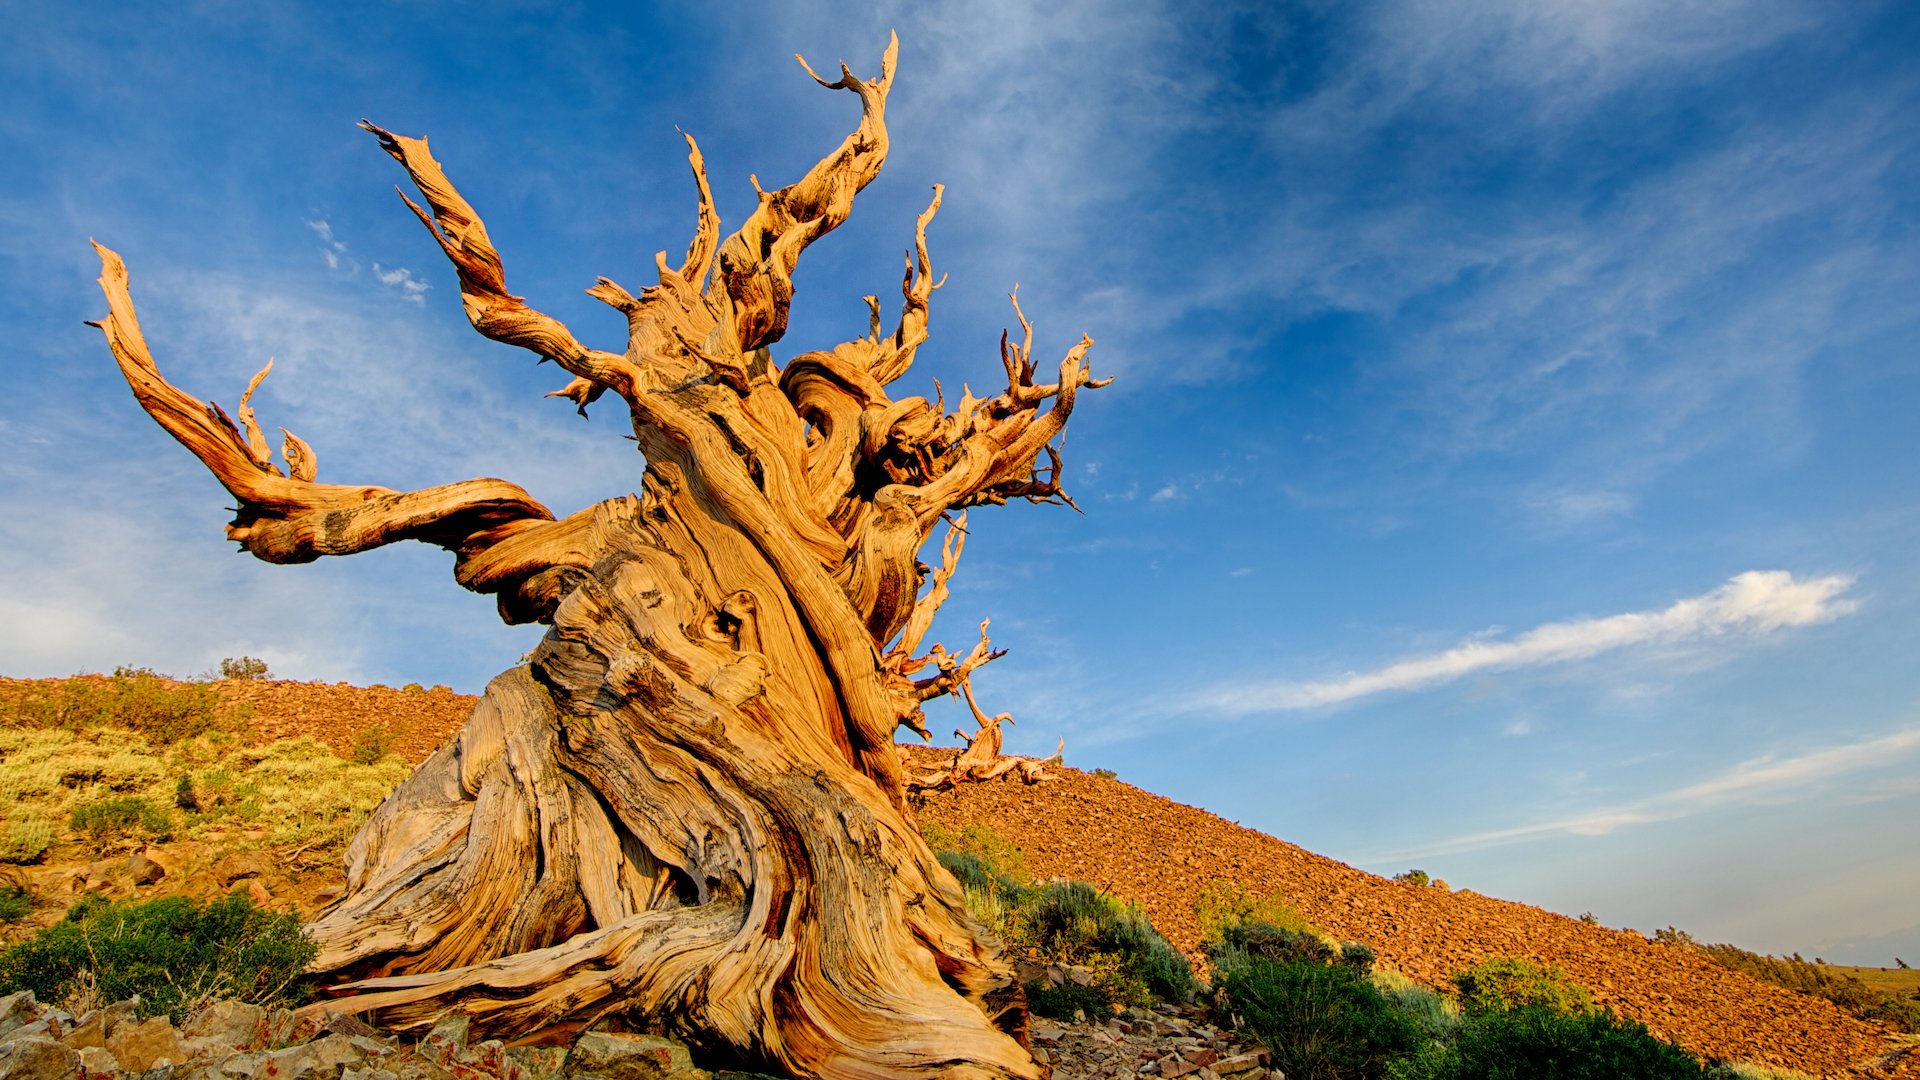 Methuselah tree – Can You Find the Oldest Tree on Earth?